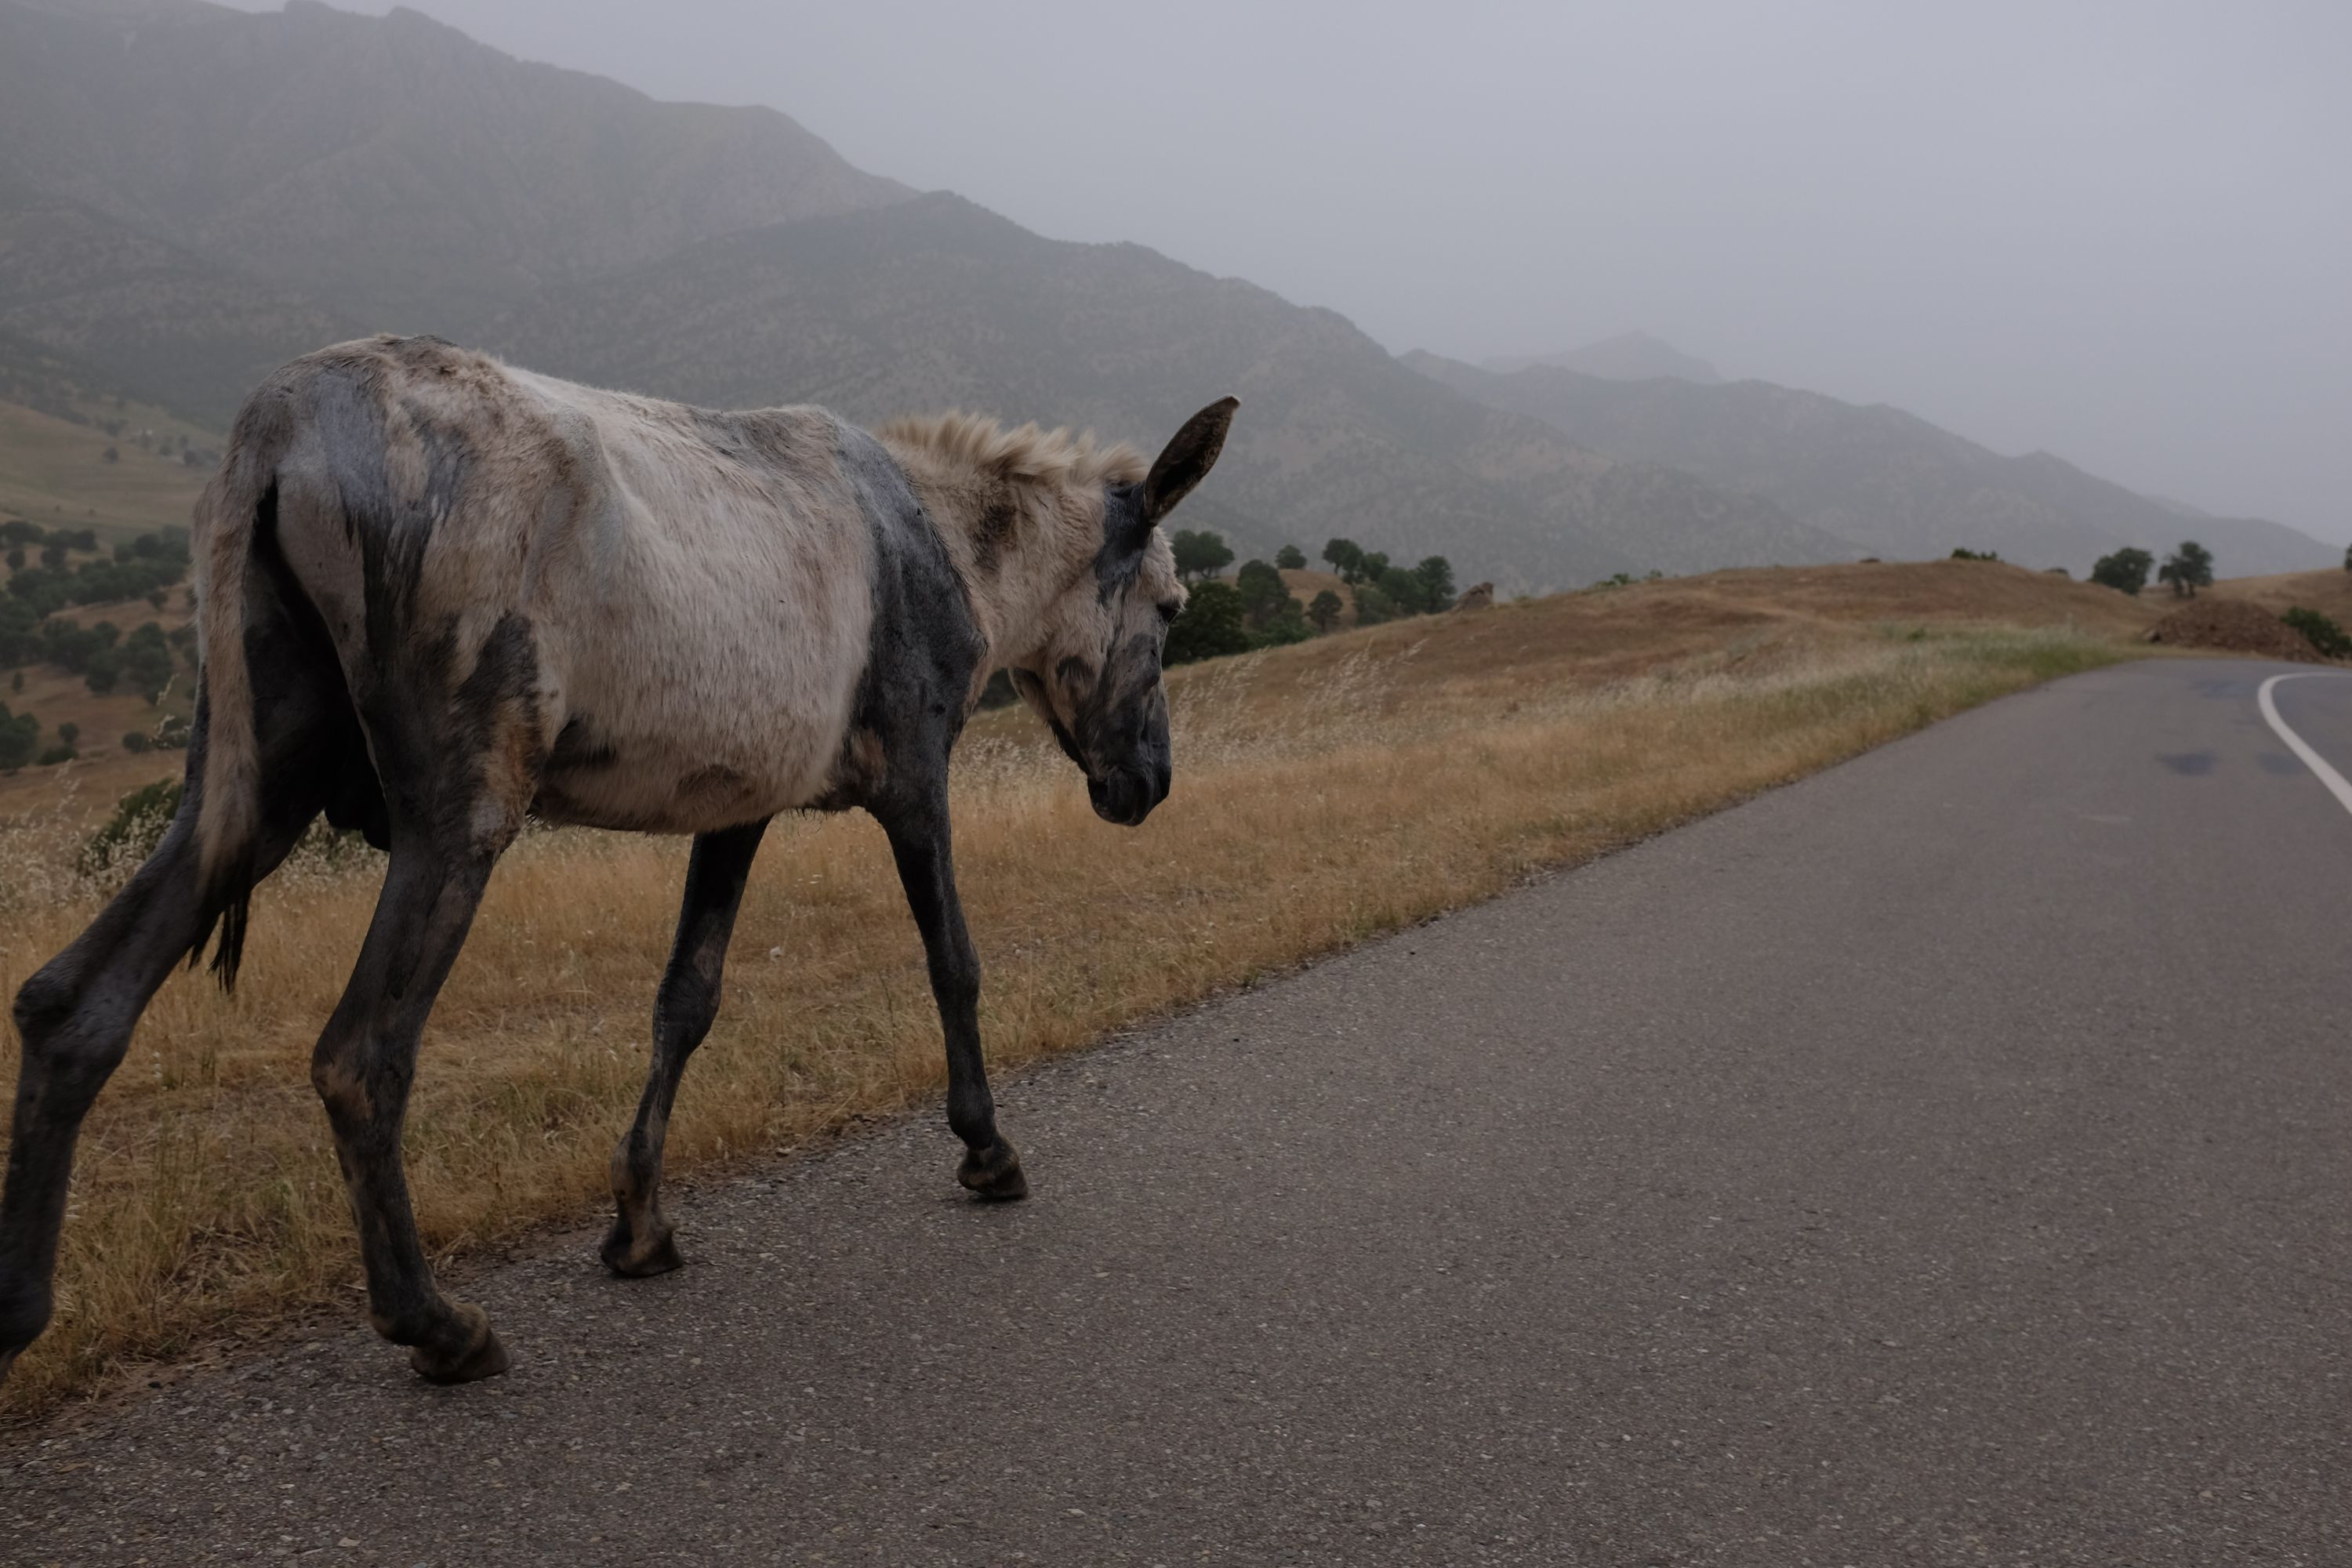 A mule walks down a deserted asphalt road in a hilly countryside.